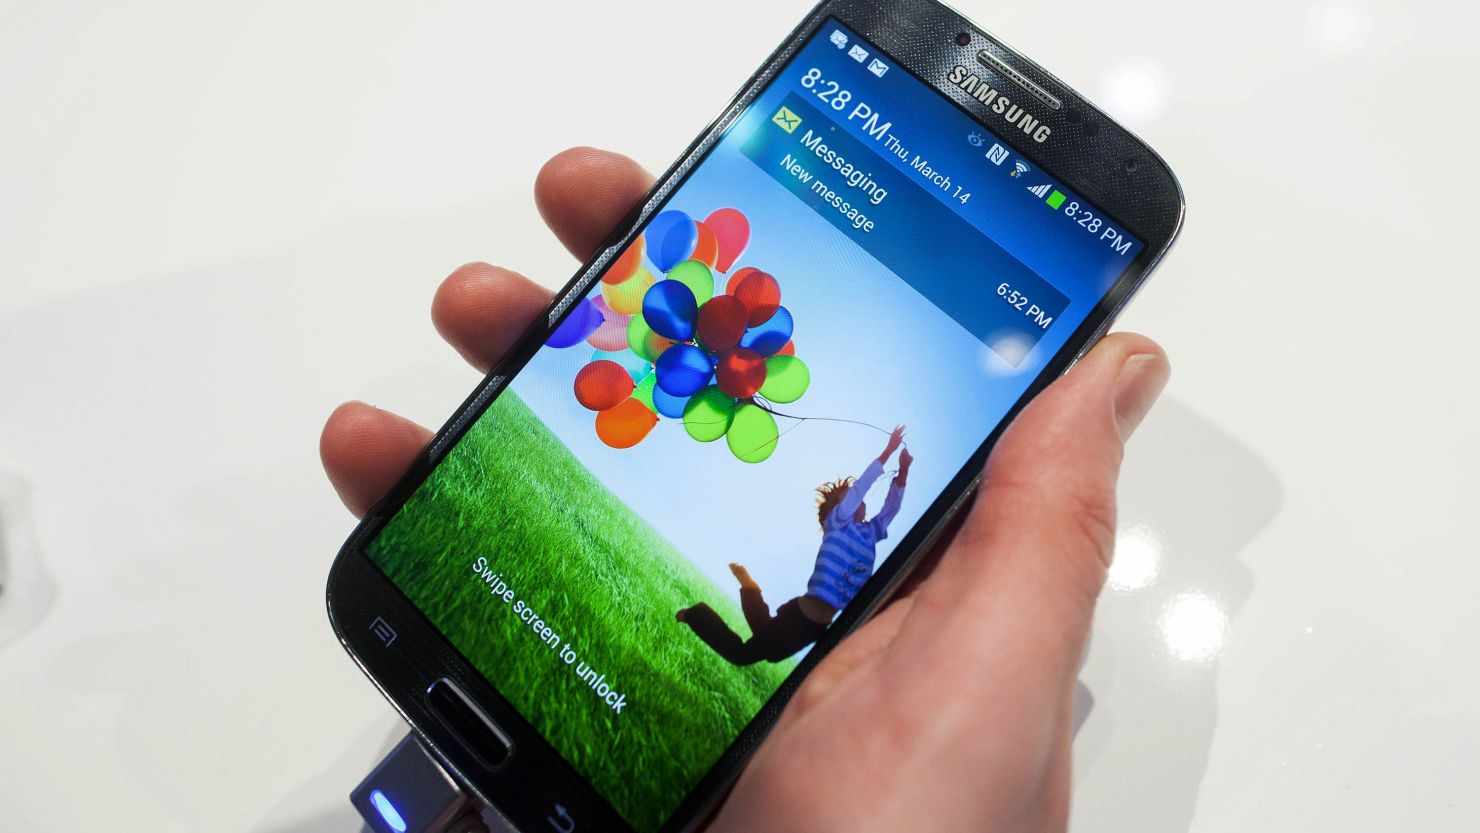 A faster model of the Galaxy S4 smartphone will be available this month in South Korea, Samsung's CEO tells Reuters.